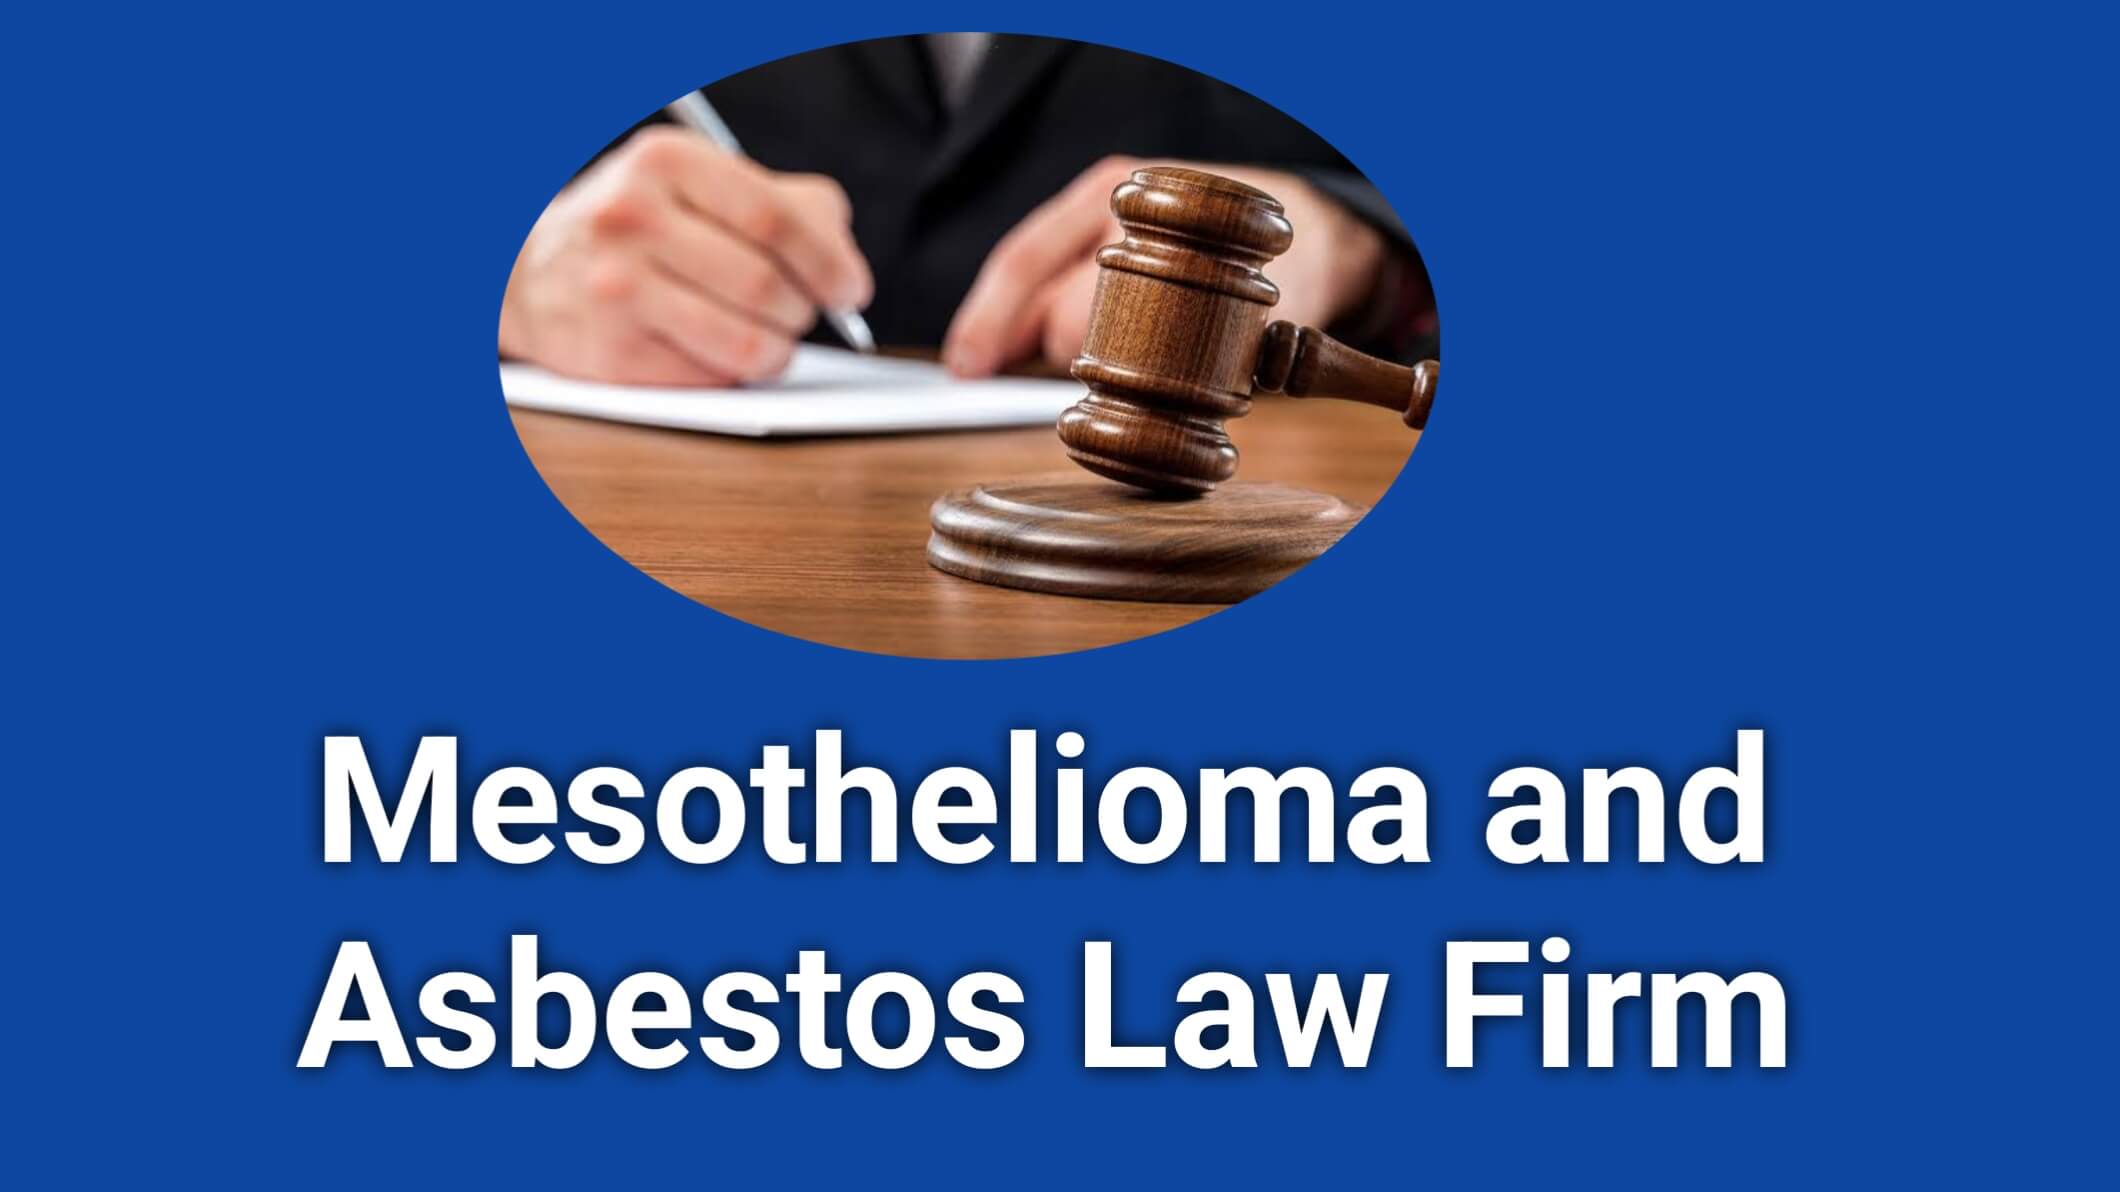 Mesothelioma Law Firms List of Top Rated Firms in the U.S